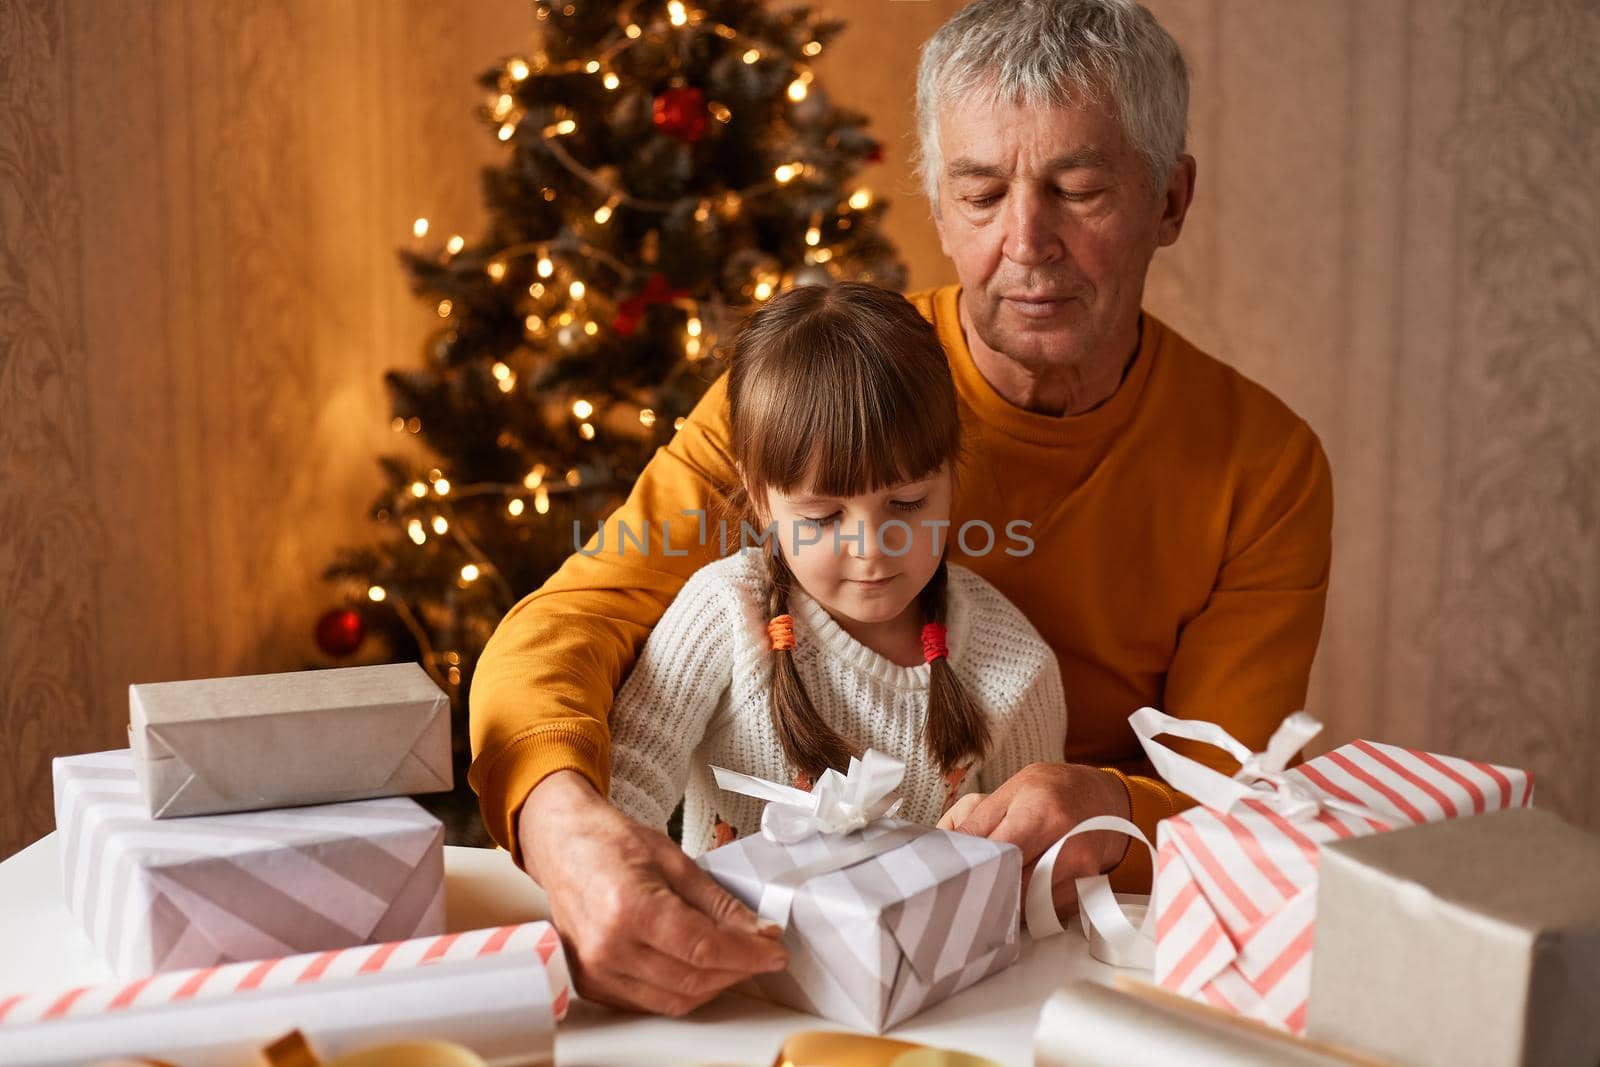 Portrait of happy family wearing casual clothing sitting at table and preparing for new year eve, packing gift boxes together, posing in festive room with christmas tree.